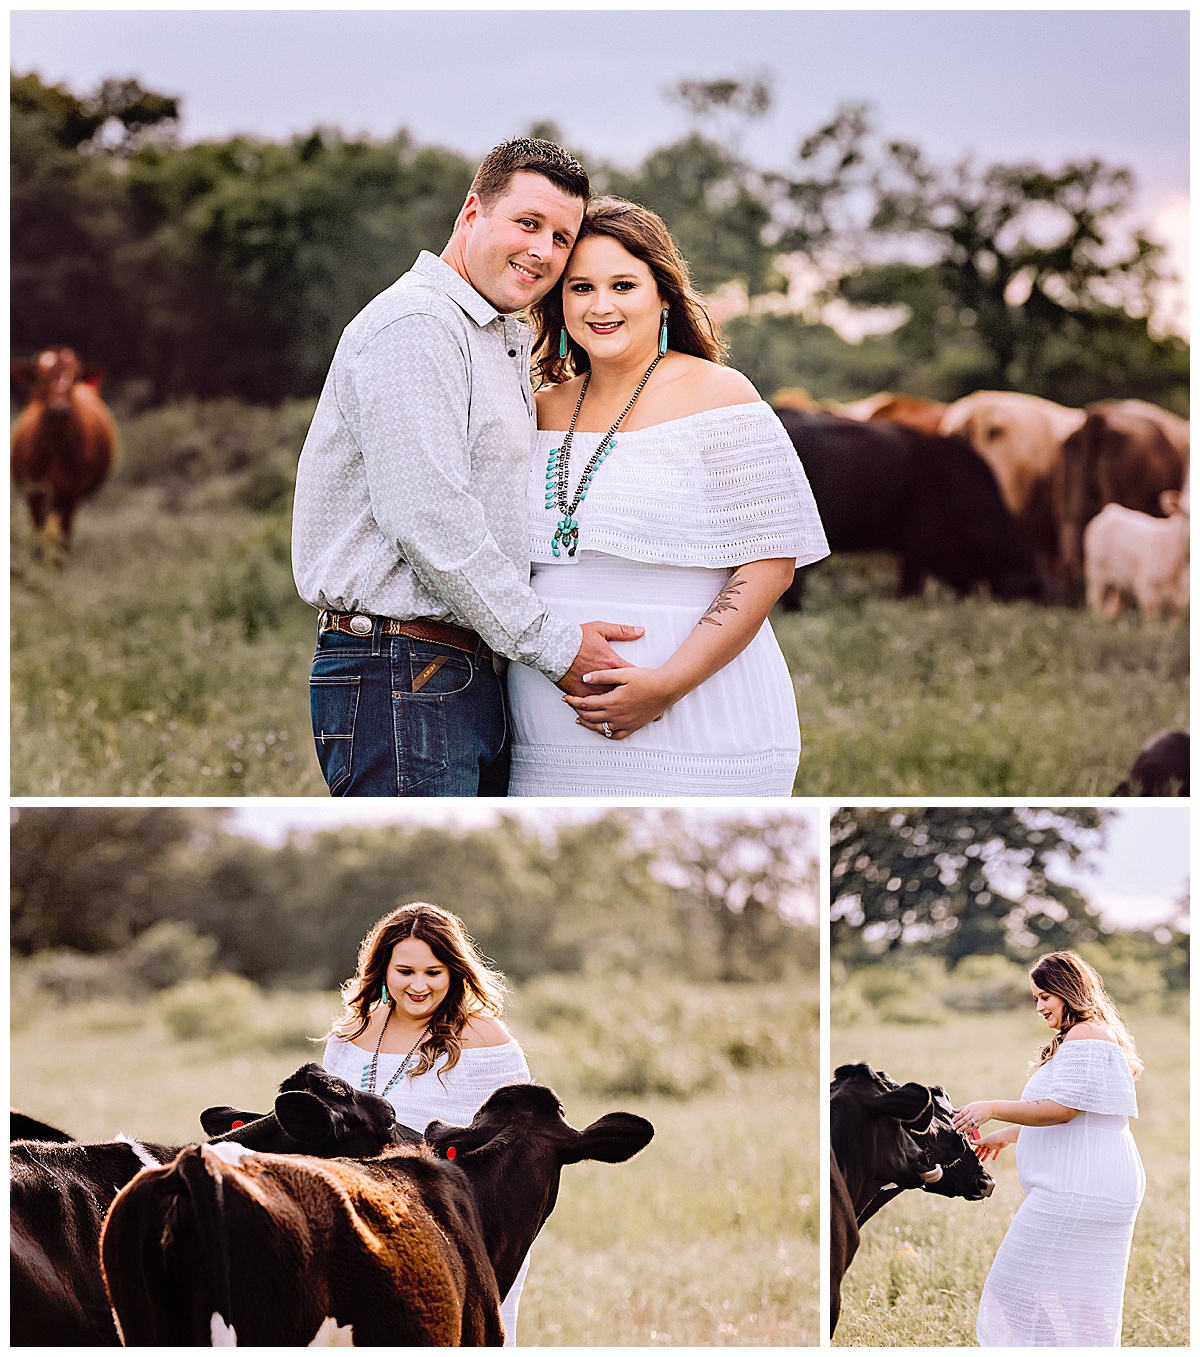 Rustic-Maternity-Session-Texas-Sunset-Carly-Barton-Photography_0065.jpg